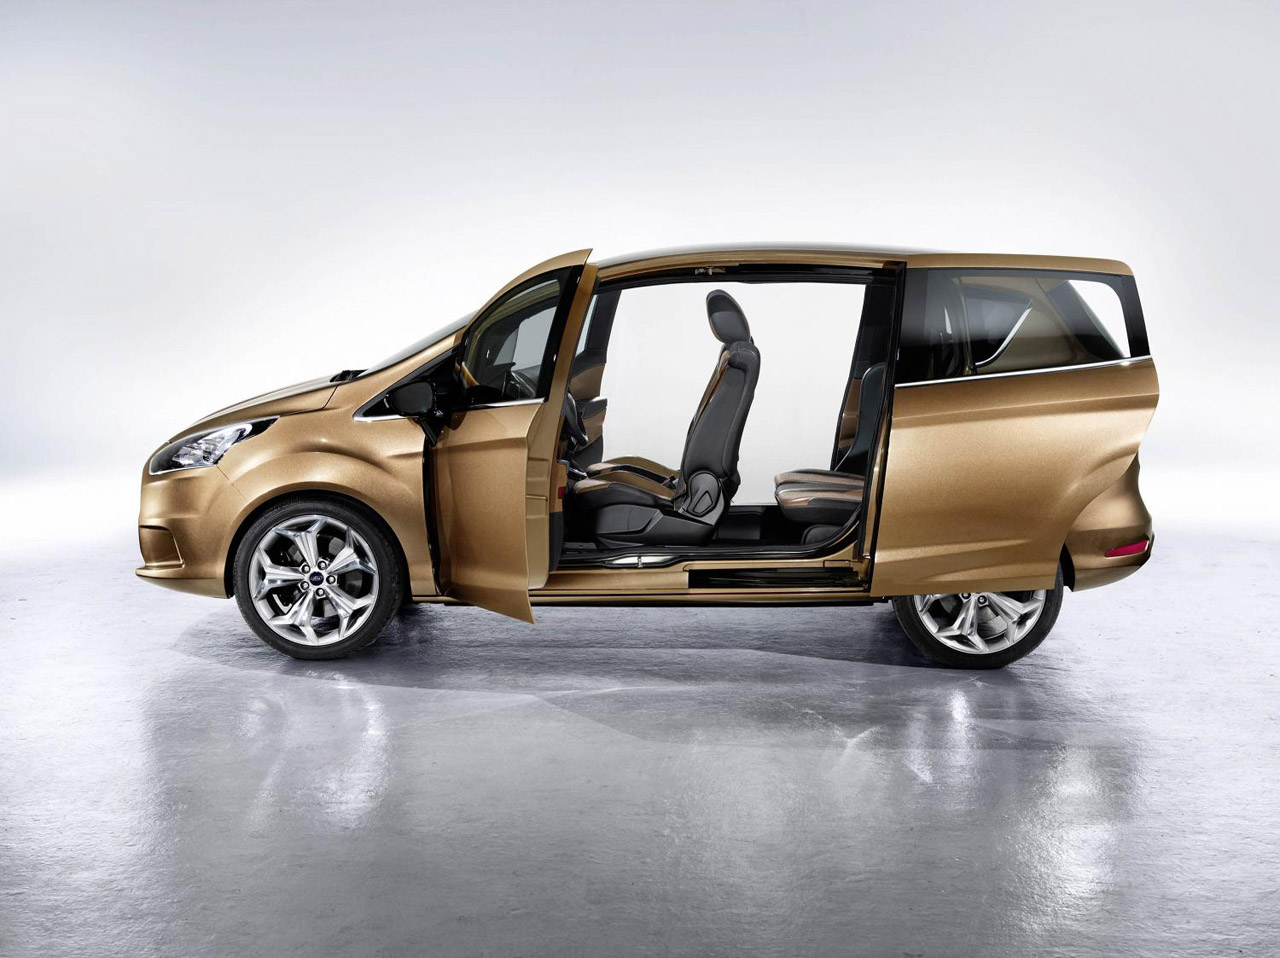 The new Ford B-Max